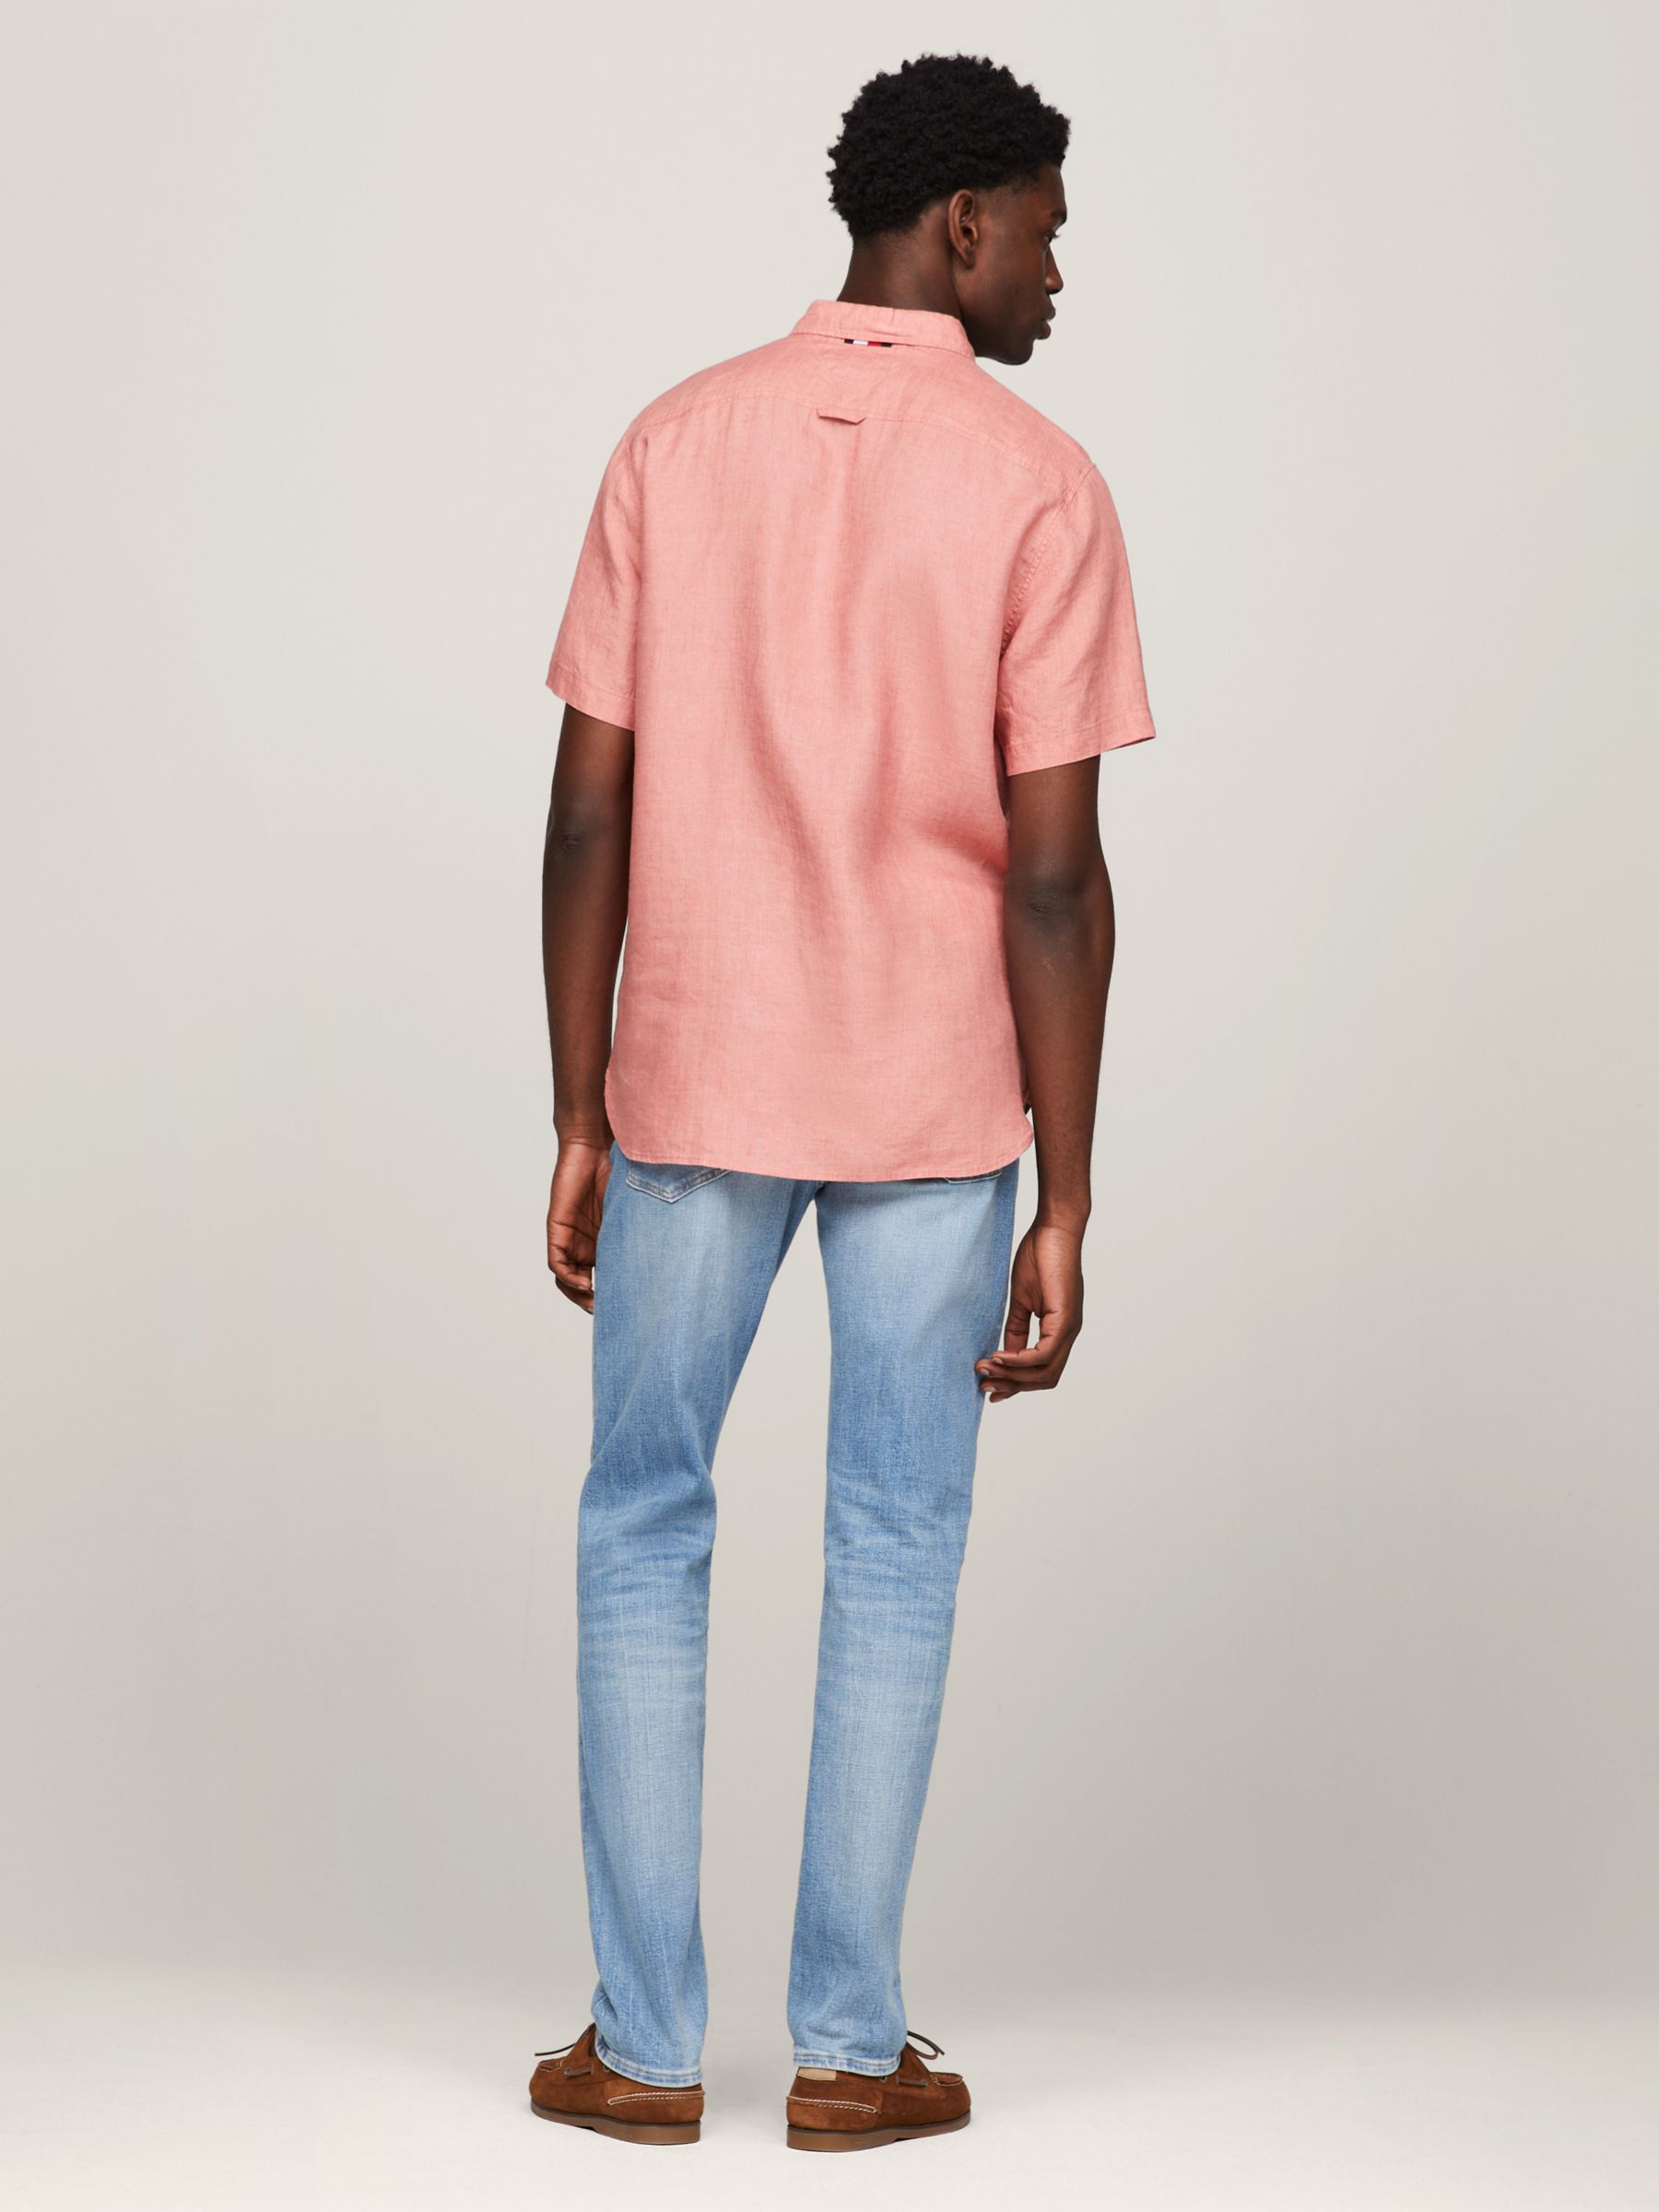 Tommy Hilfiger Pigment Dyed Linen Shirt, Teaberry Blossom, L